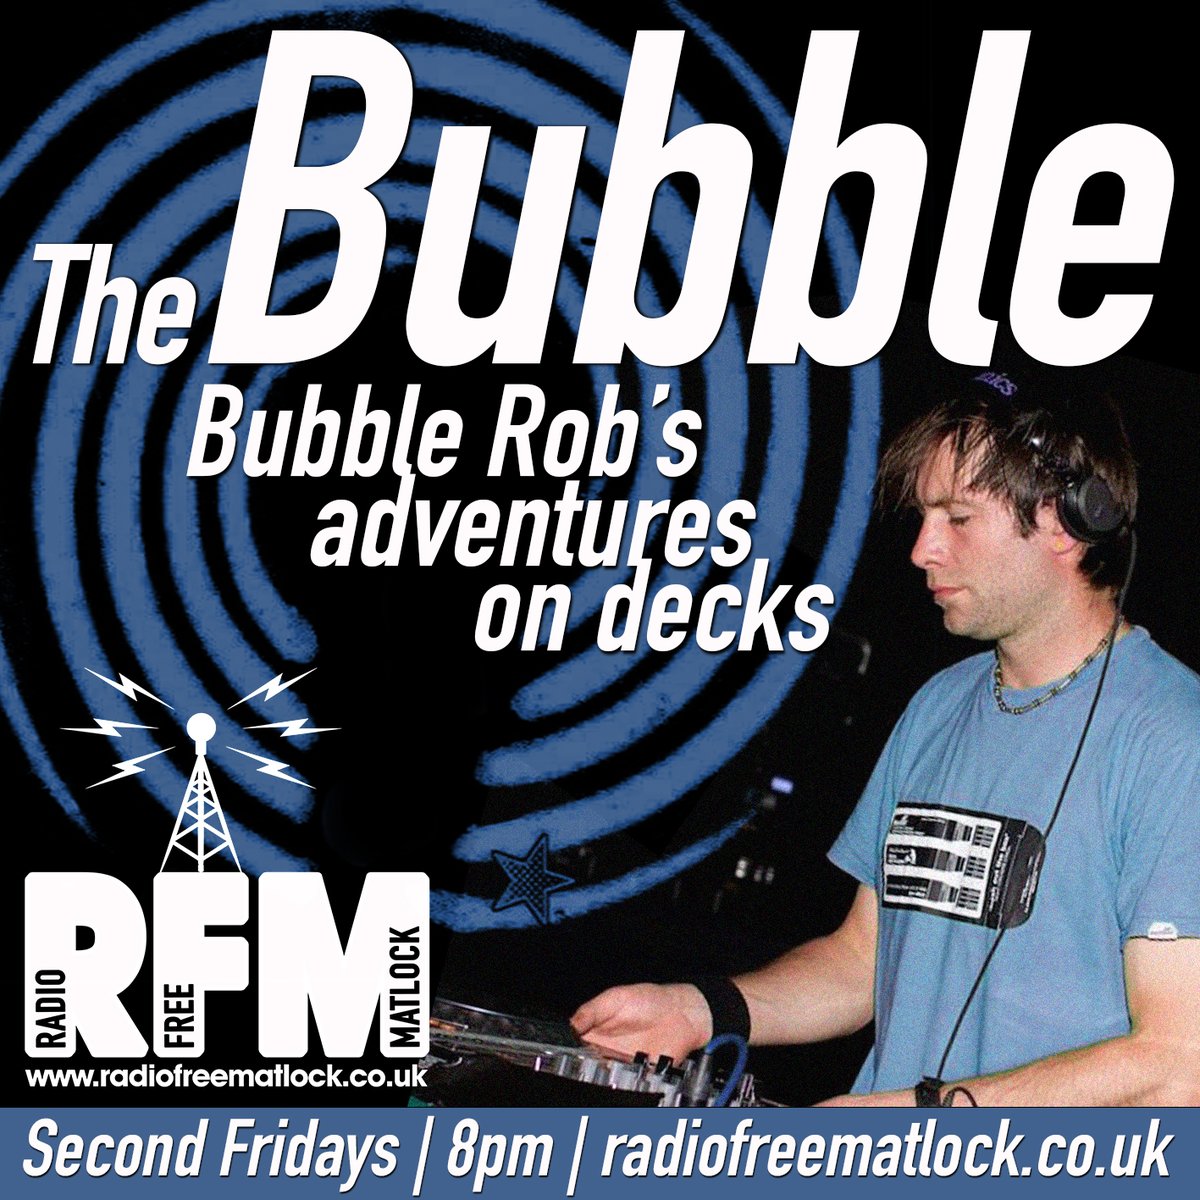 That's all from RFM's 'livestream' tonight, but don't forget you can catch up with all our shows on mixcloud.com/radiofreematlo… Tomorrow we're back with RACH (@rcoyle77) 7pm-8, followed by @bubblerob from 8-10pm. Until then, have a peaceful evening 🙏x